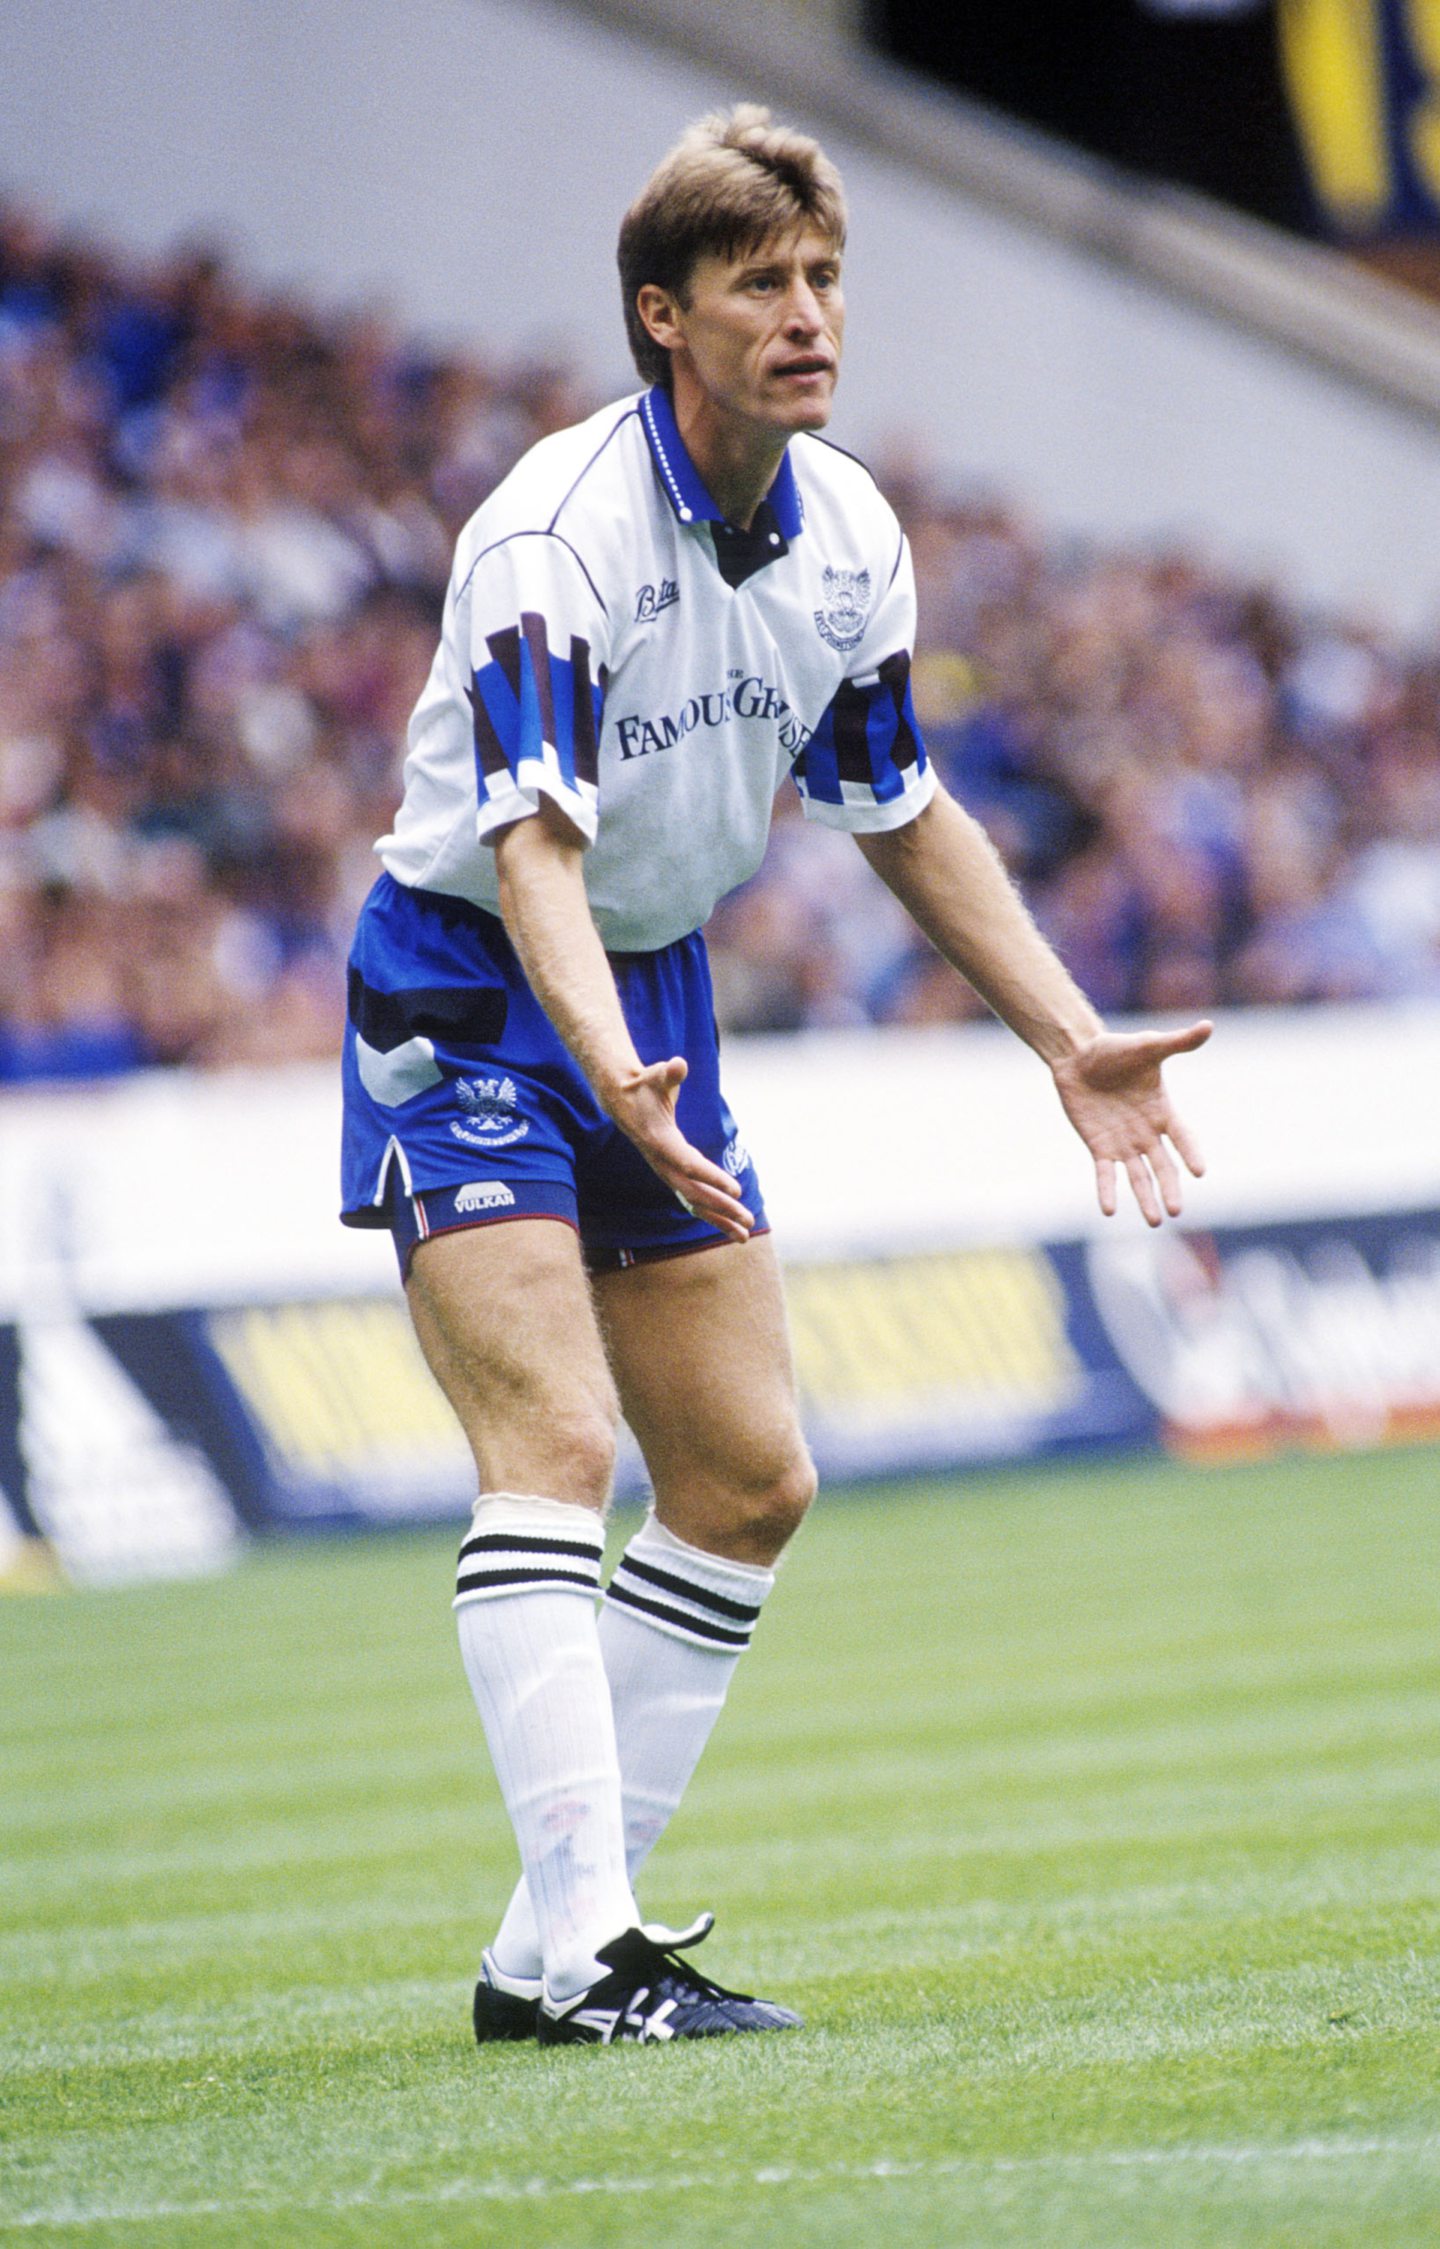 St Johnstone's Sergei Baltacha in action against Rangers at Ibrox in 1992. Image: SNS.